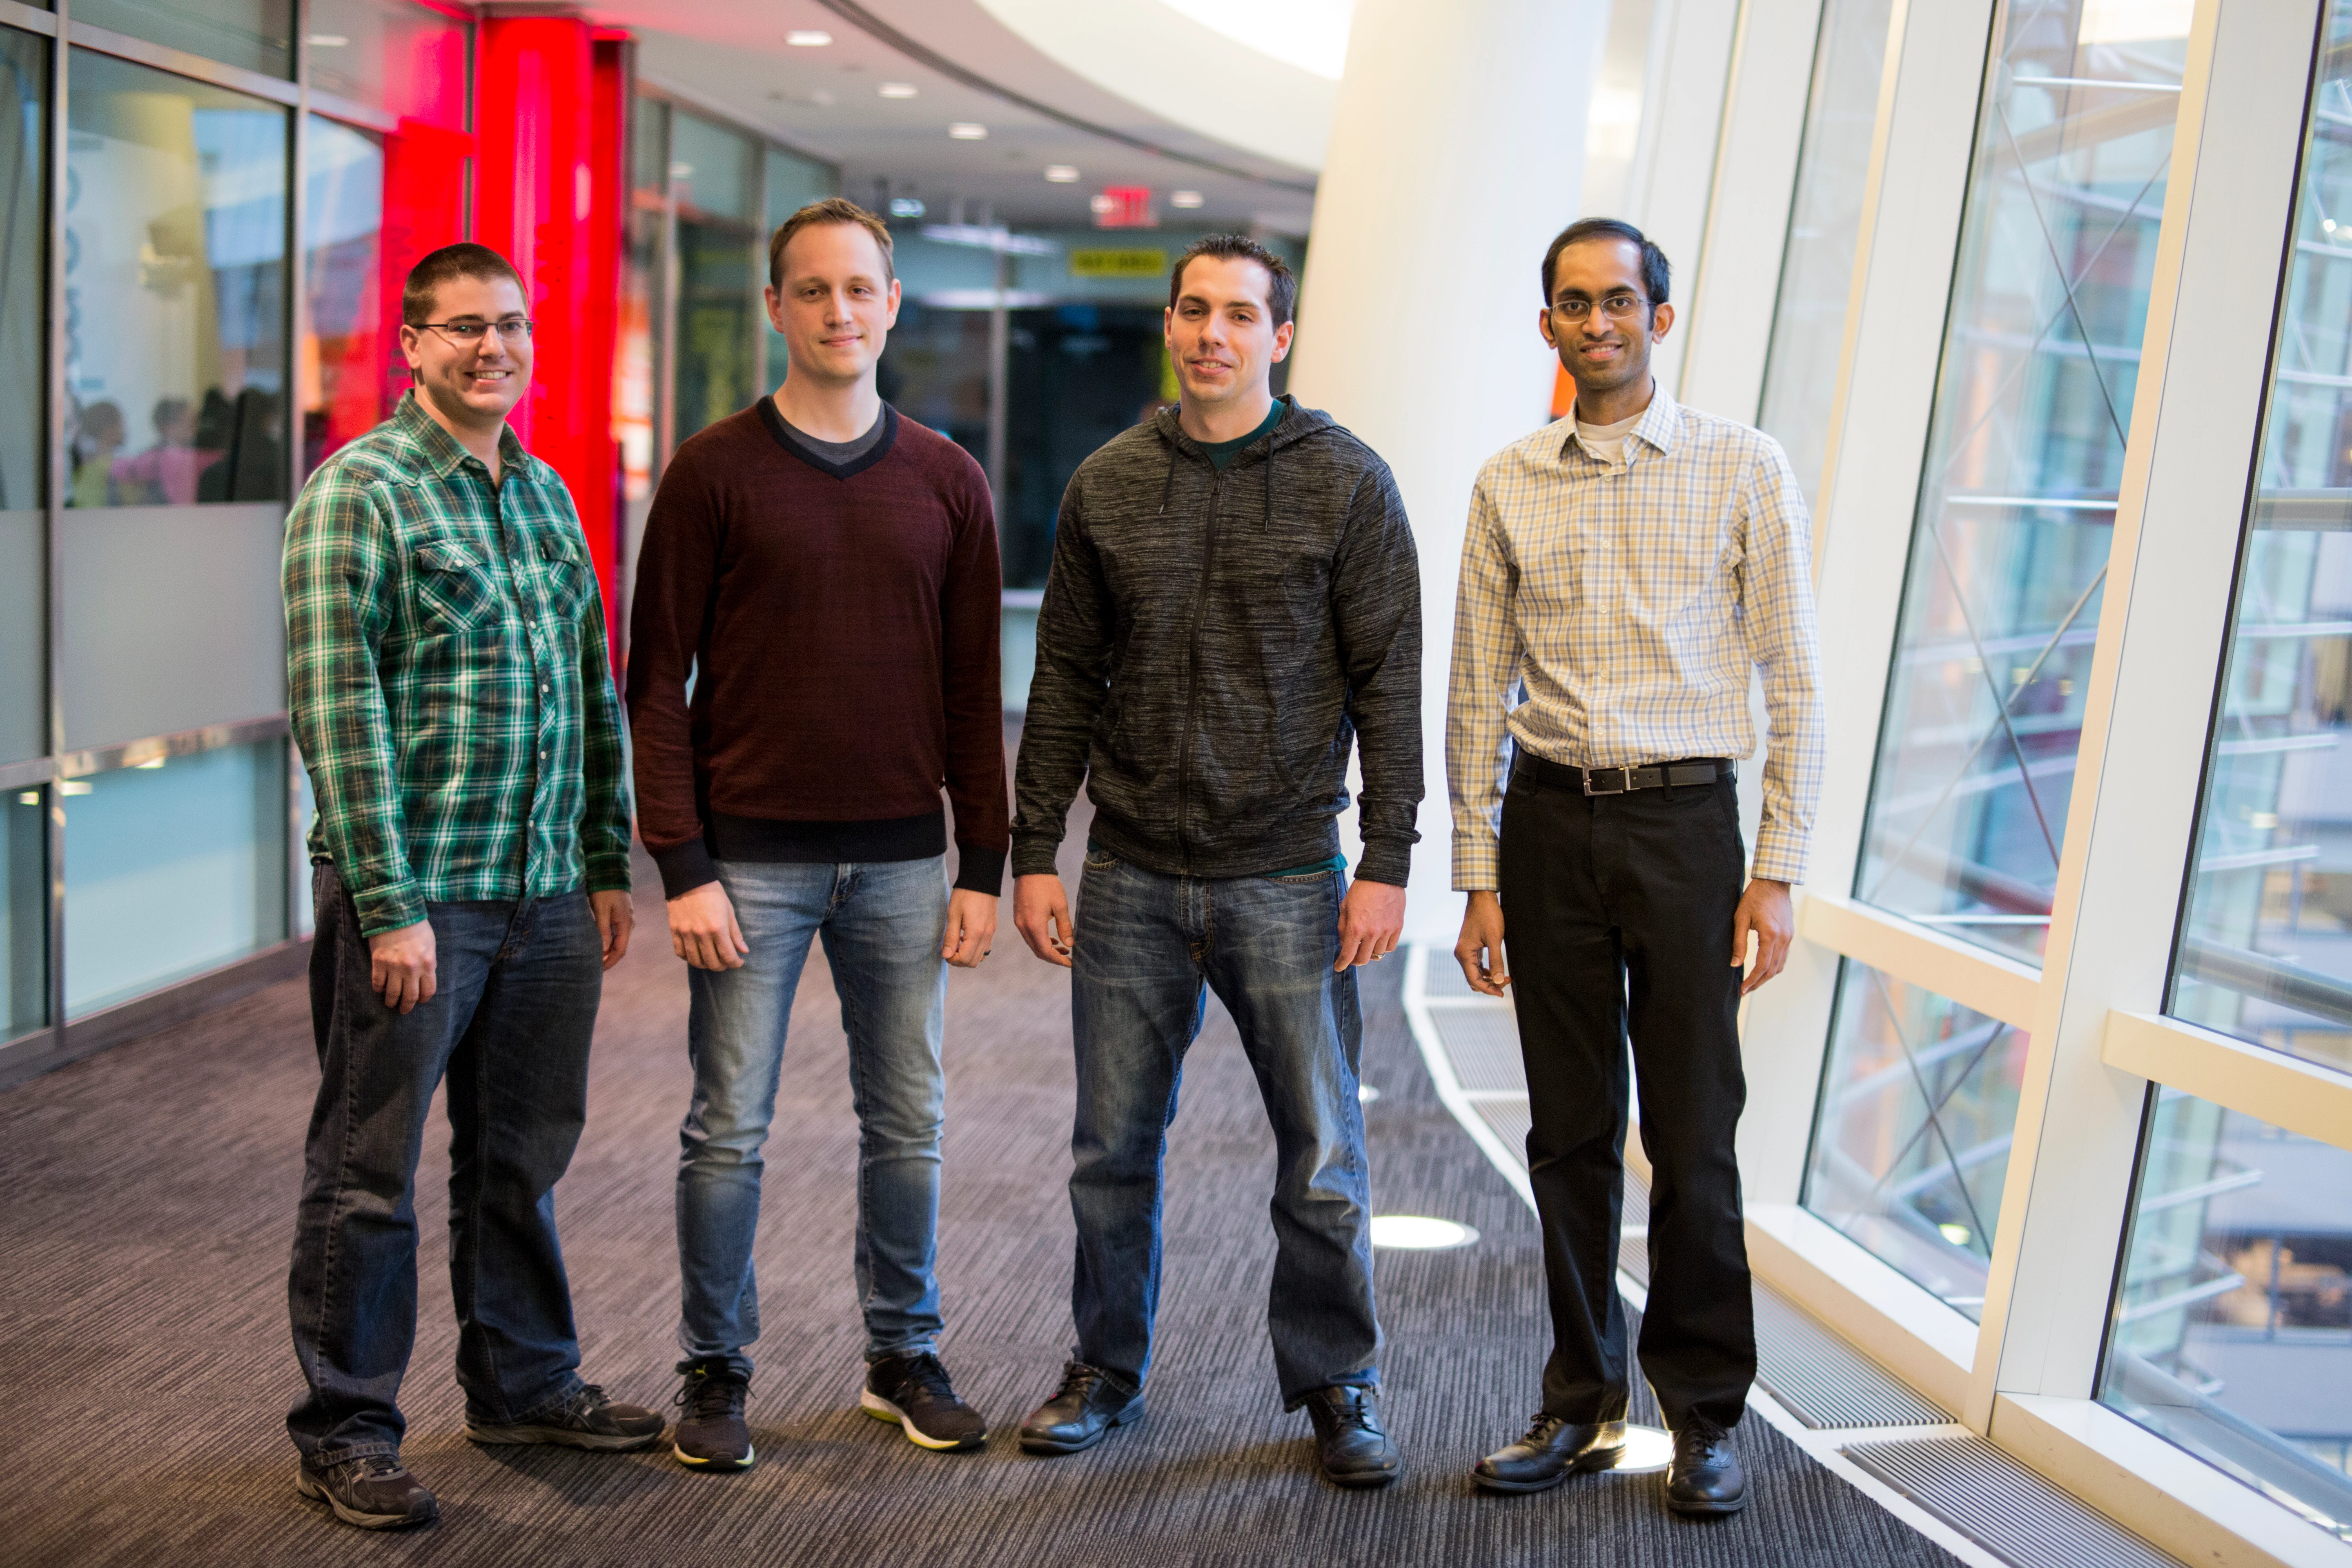 David Grohmann, Michael Nilsson, Jon Dorando and Naveen Santhapuri, four engineers based at Bloomberg Global Headquarters in New York who worked on the Learning-to-Rank plug-in. (Photographer: Teddy Vuong/Bloomberg, January 17, 2017)